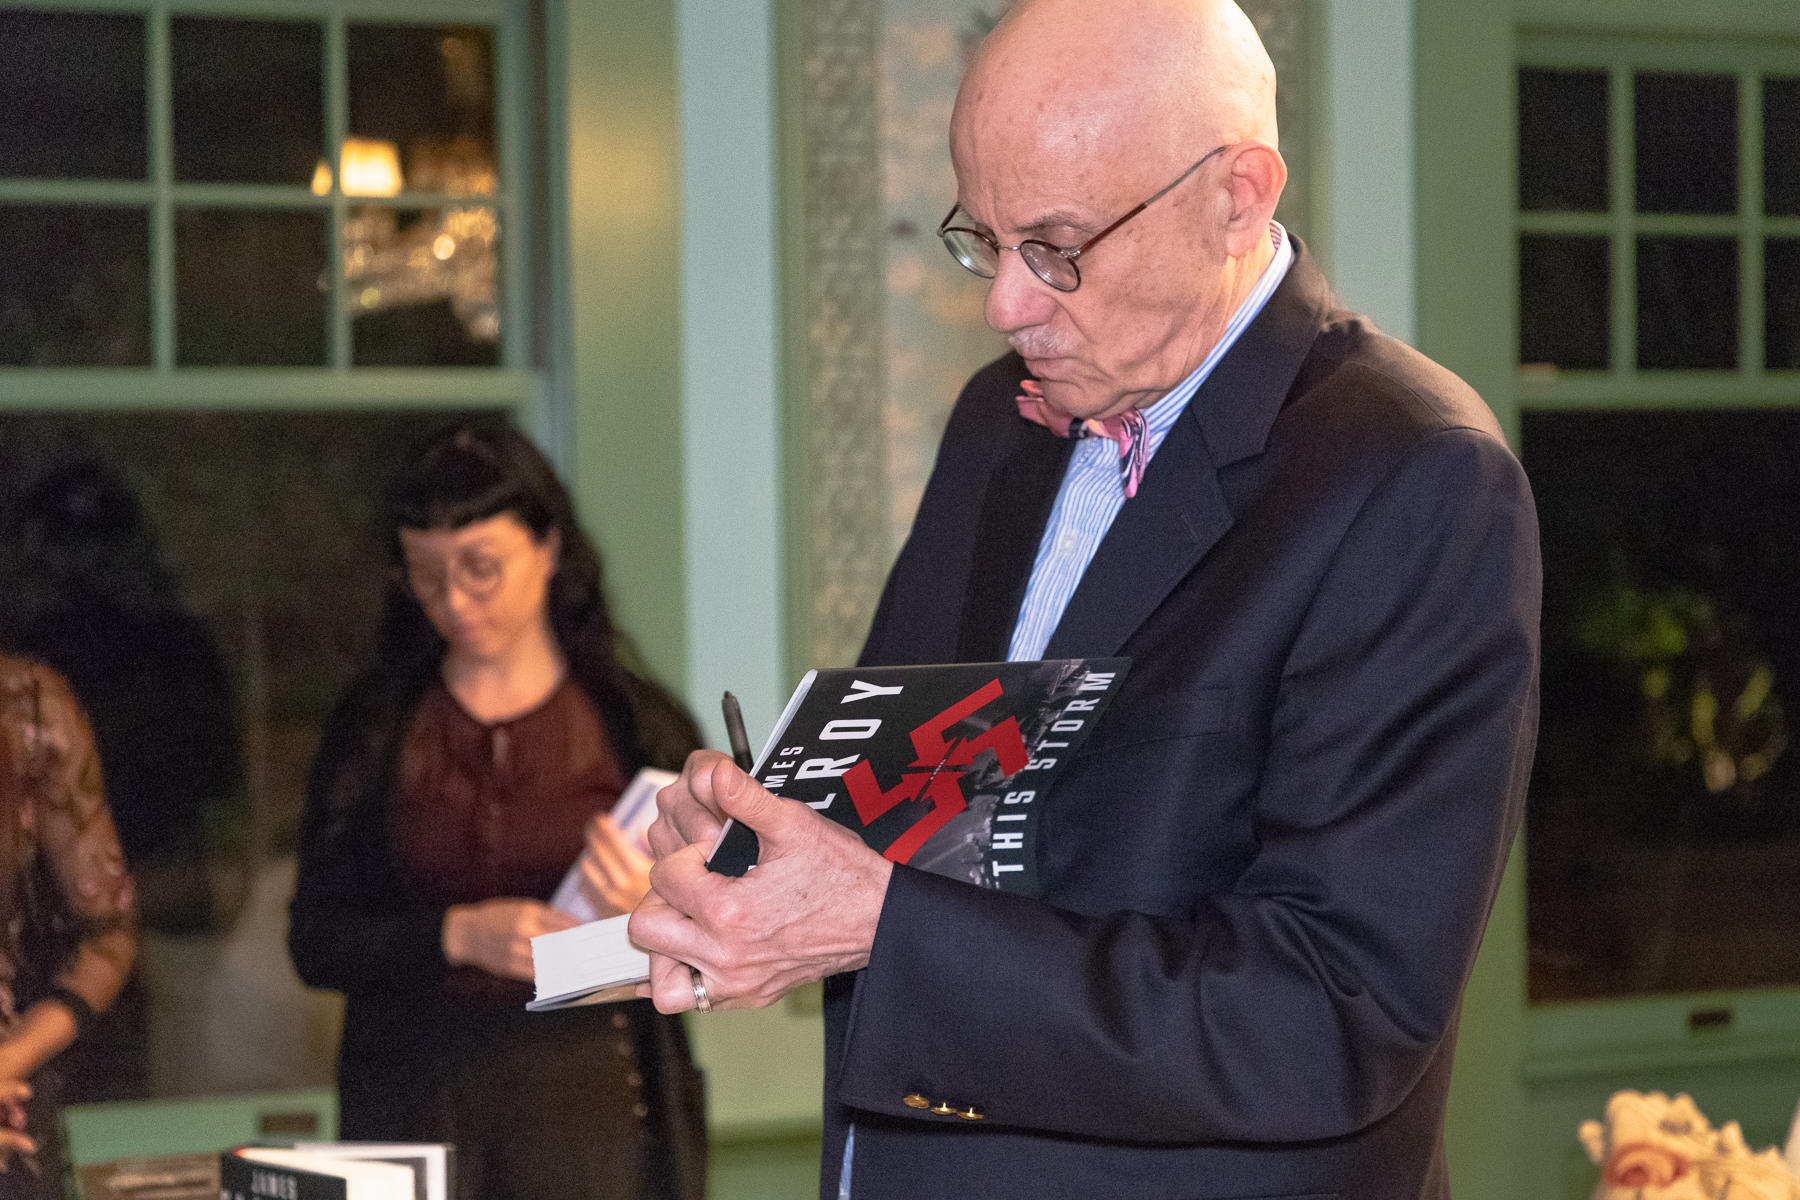 Crime fiction author James Ellroy signing a copy of his latest book This Storm at the LARB Luminary Dinner, Coriolis client event